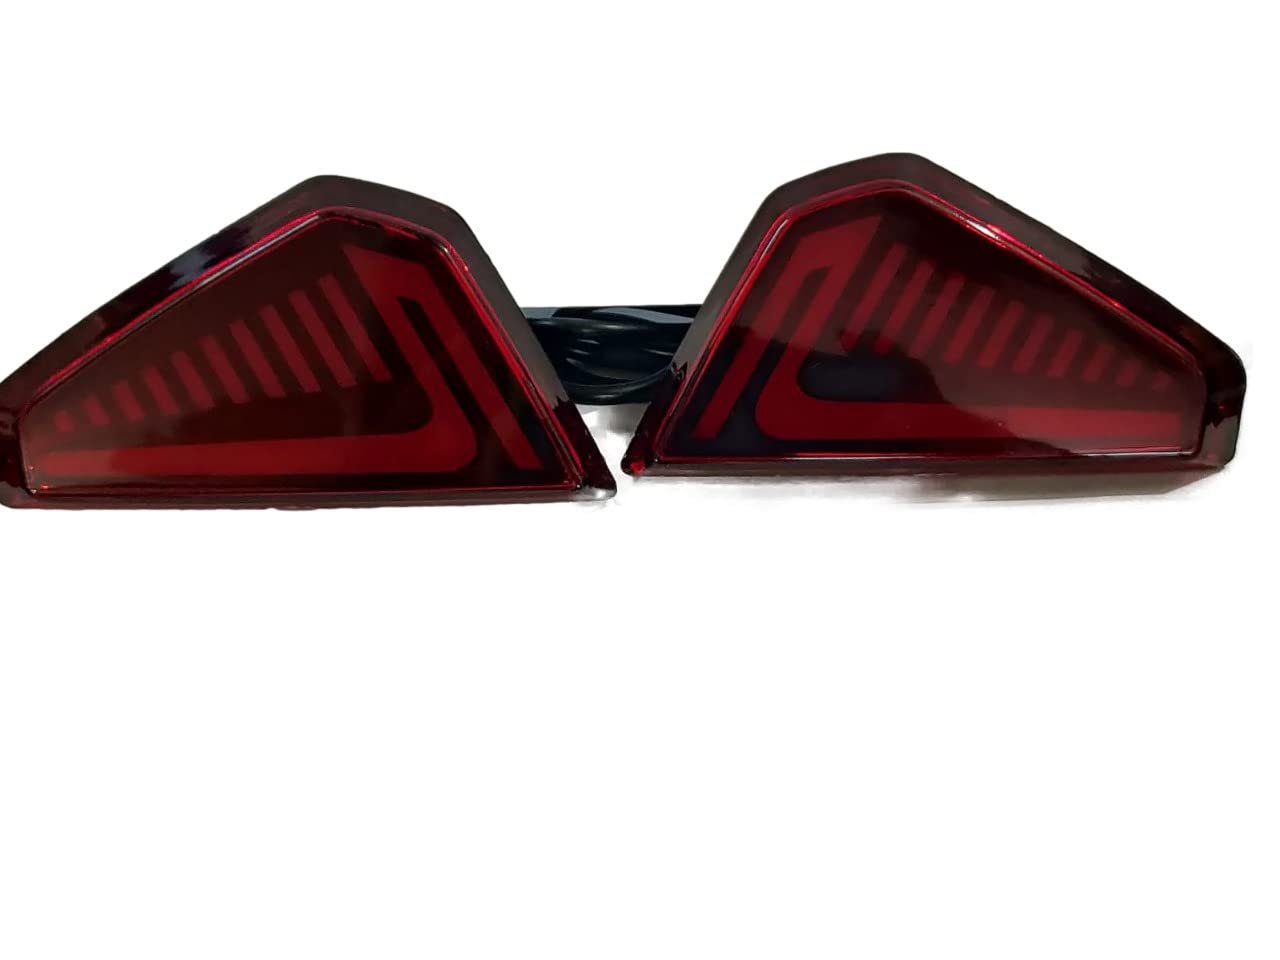 Car reflector LED Brake Light with scan and turn Indicator for Rear Bumper Fit for Nexon 2021 (Set of 2, Matrix) Image 